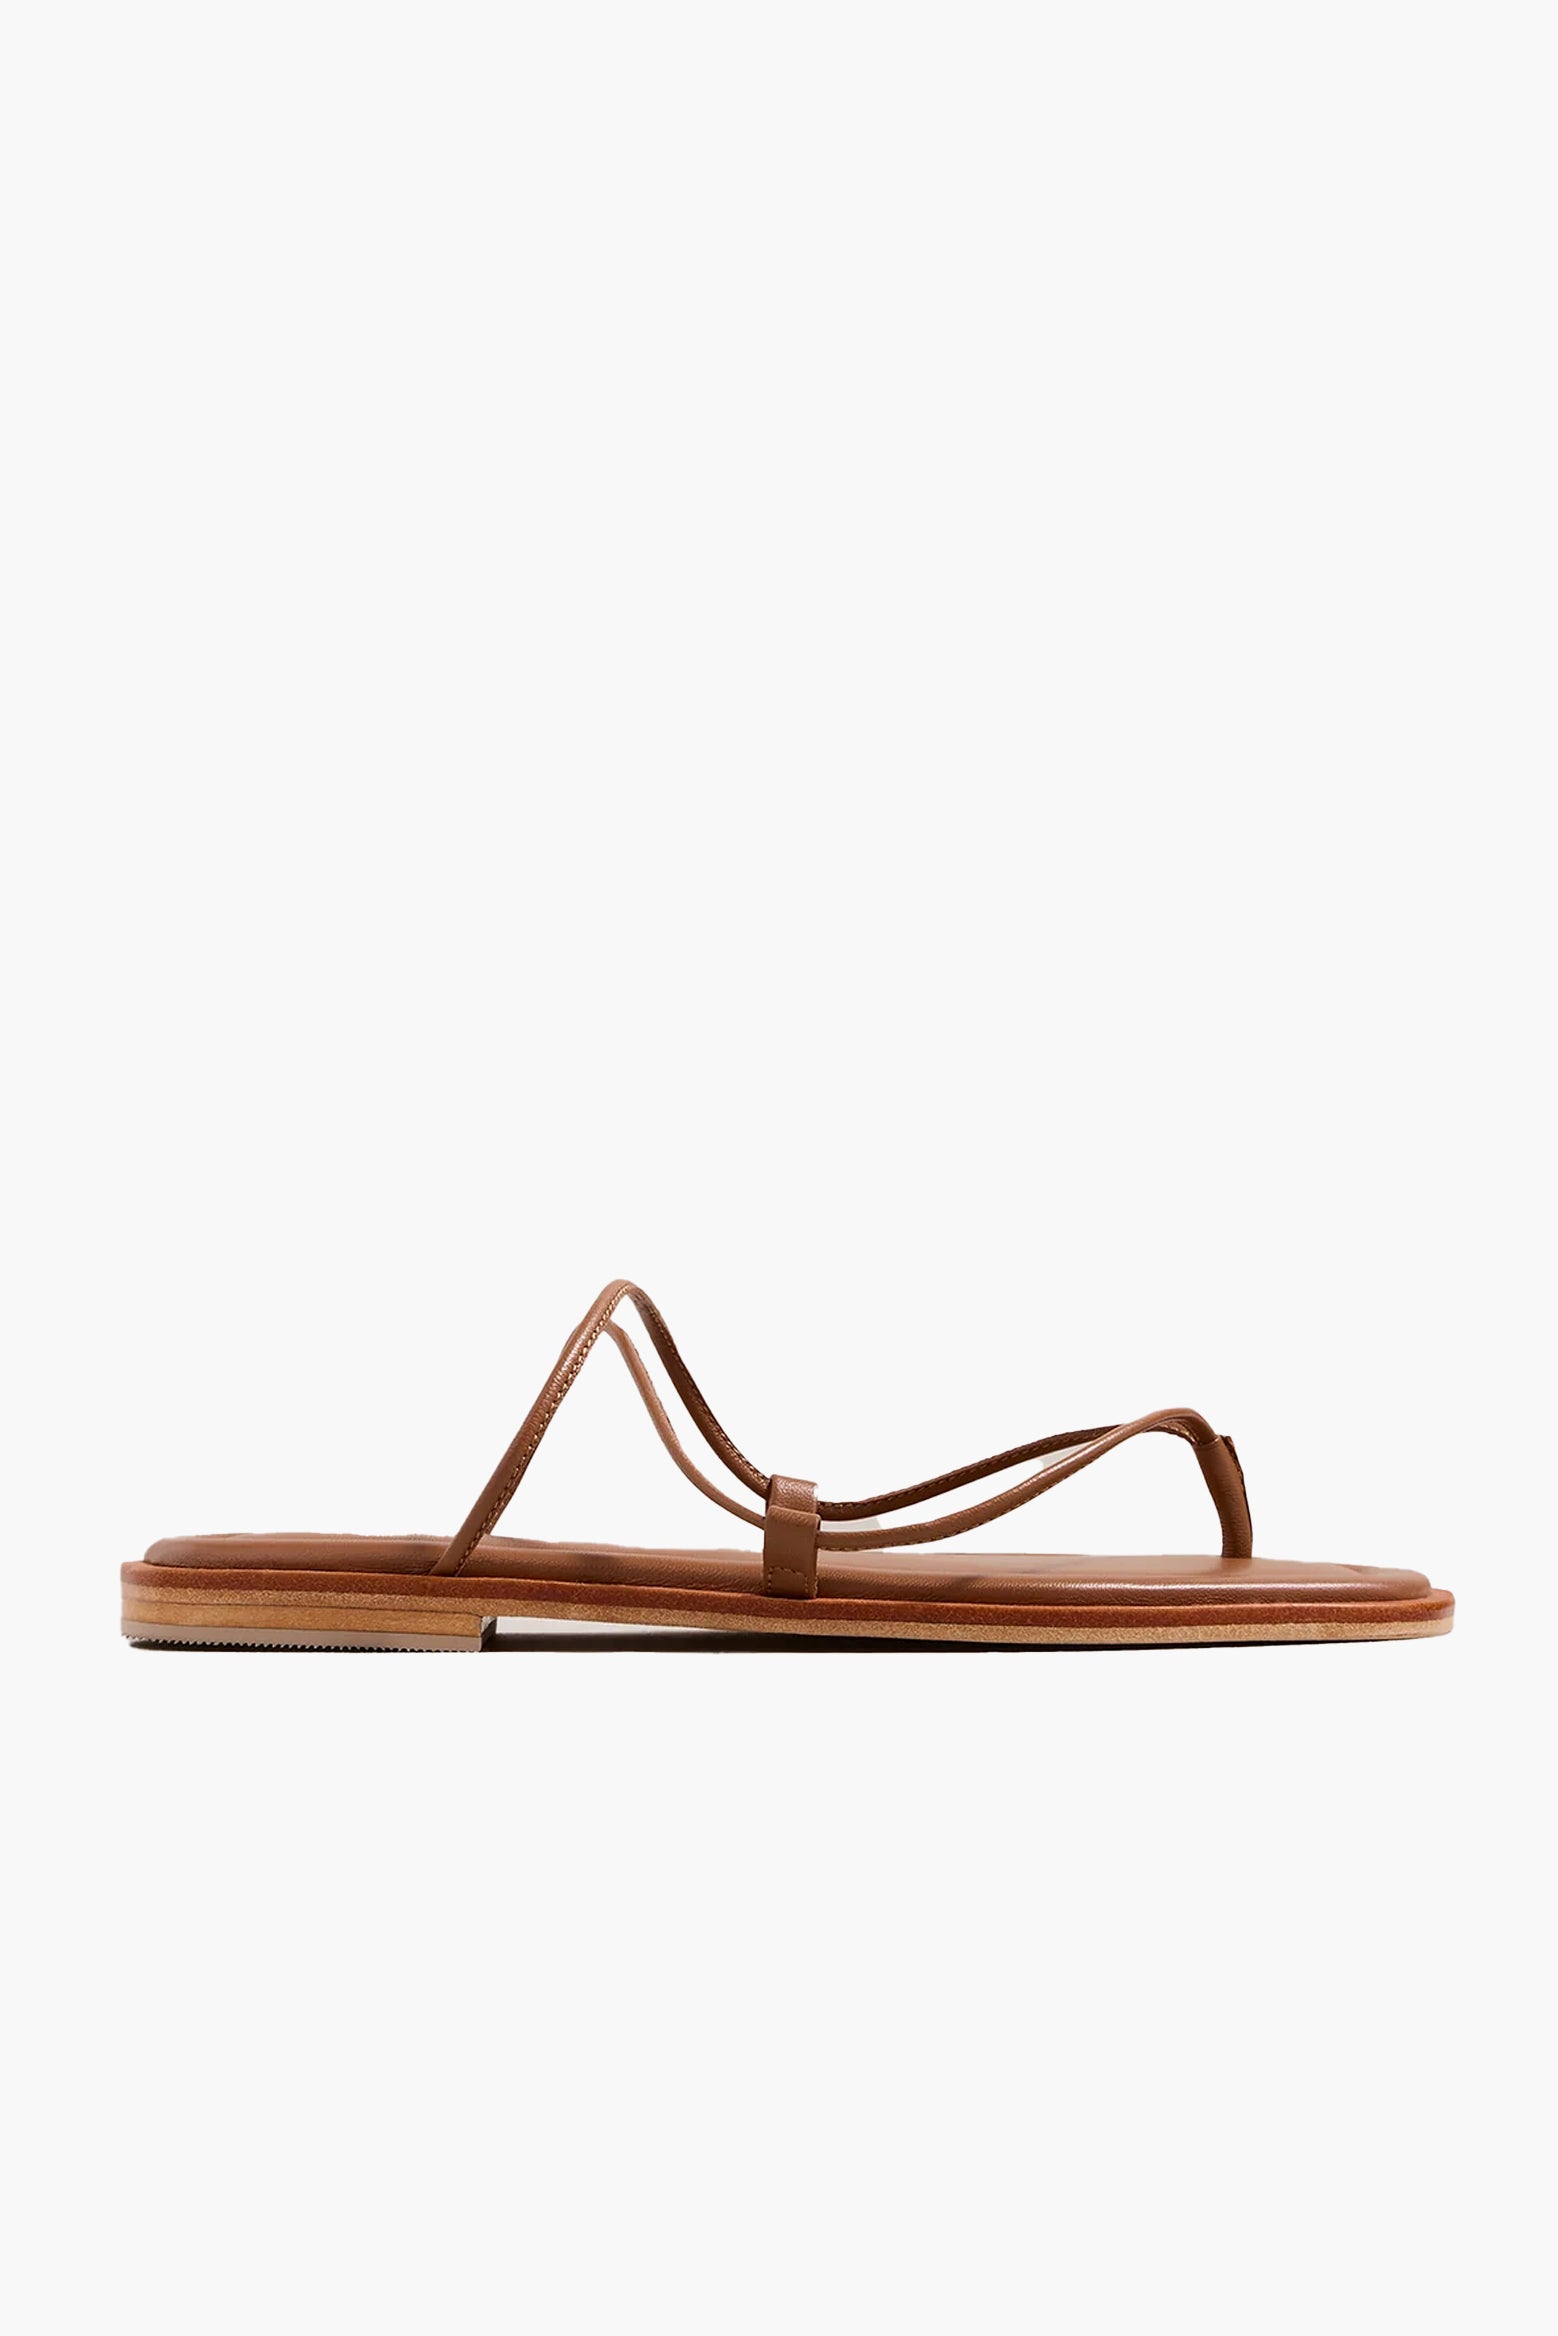 A.Emery Nodi Sandal in Deep Tan available at The New Trend Australia.